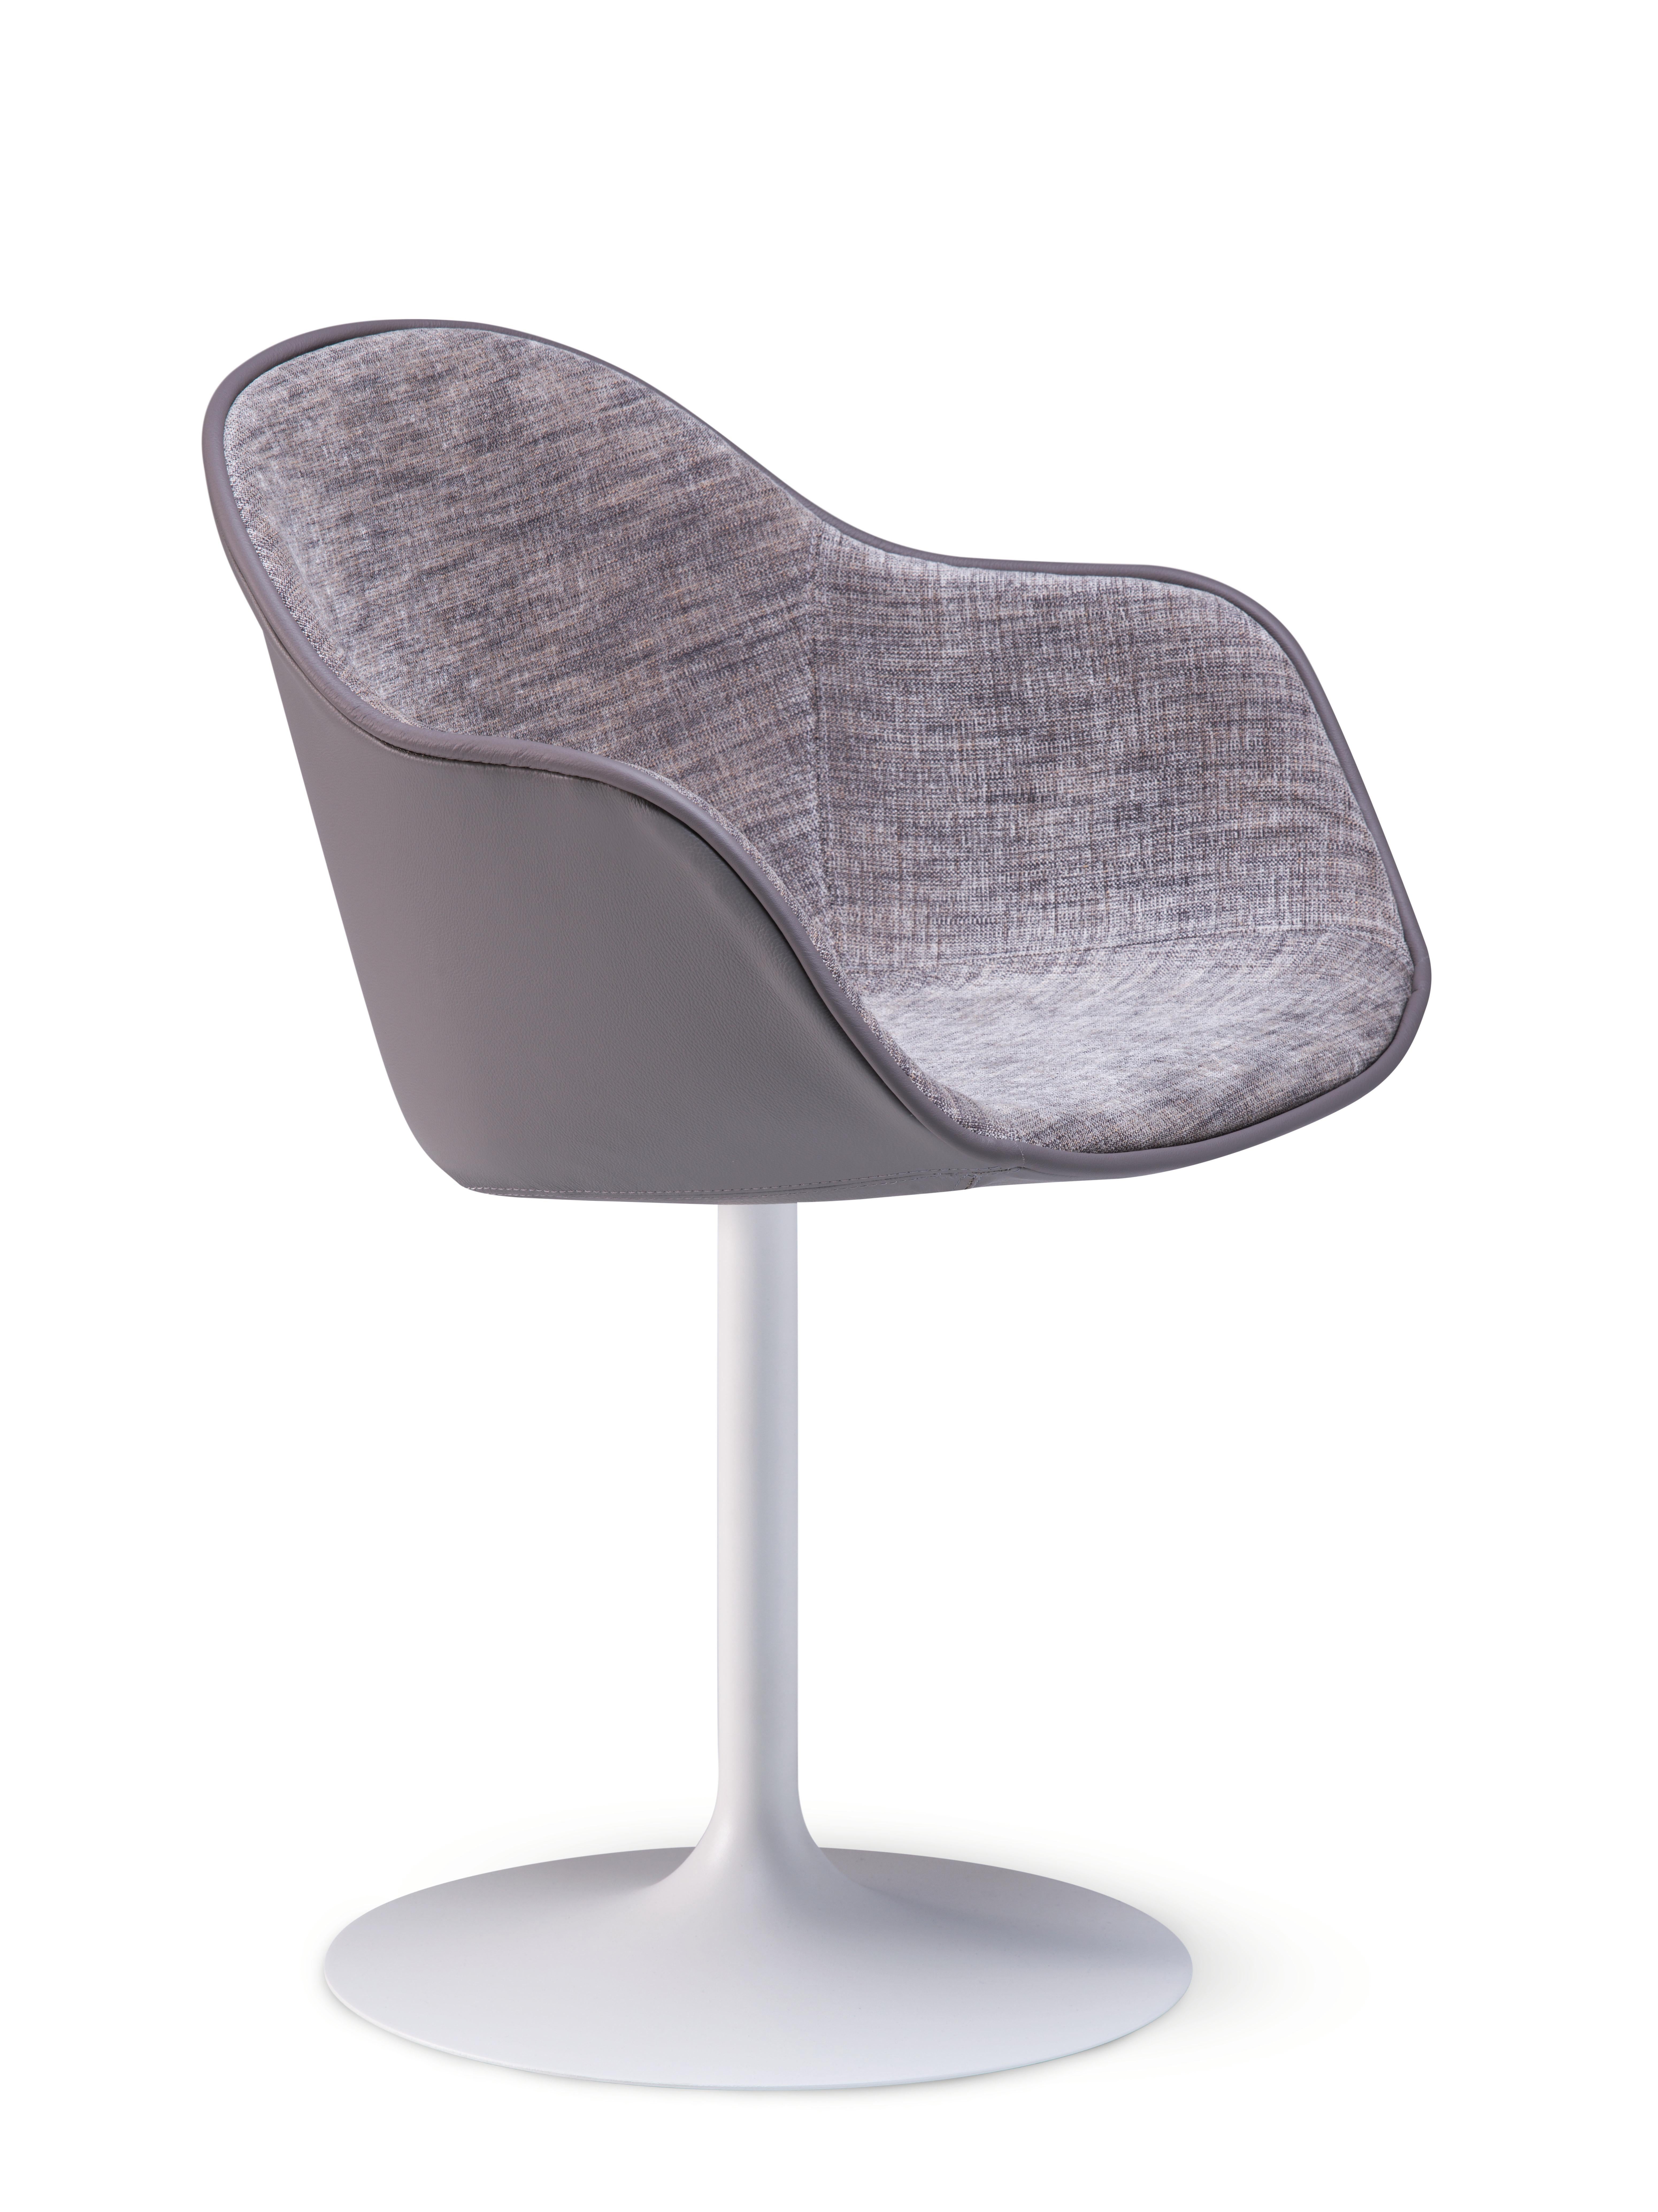 Alias 07G New Lady Soft Calyx Chair with Upholstery Seat & White Lacquered Steel Frame by Paolo Rizzatto

Chair with swivel base in lacquered steel. Shell in polyurethane covered with fabric or leather (cover is not removable). NOTE: it is